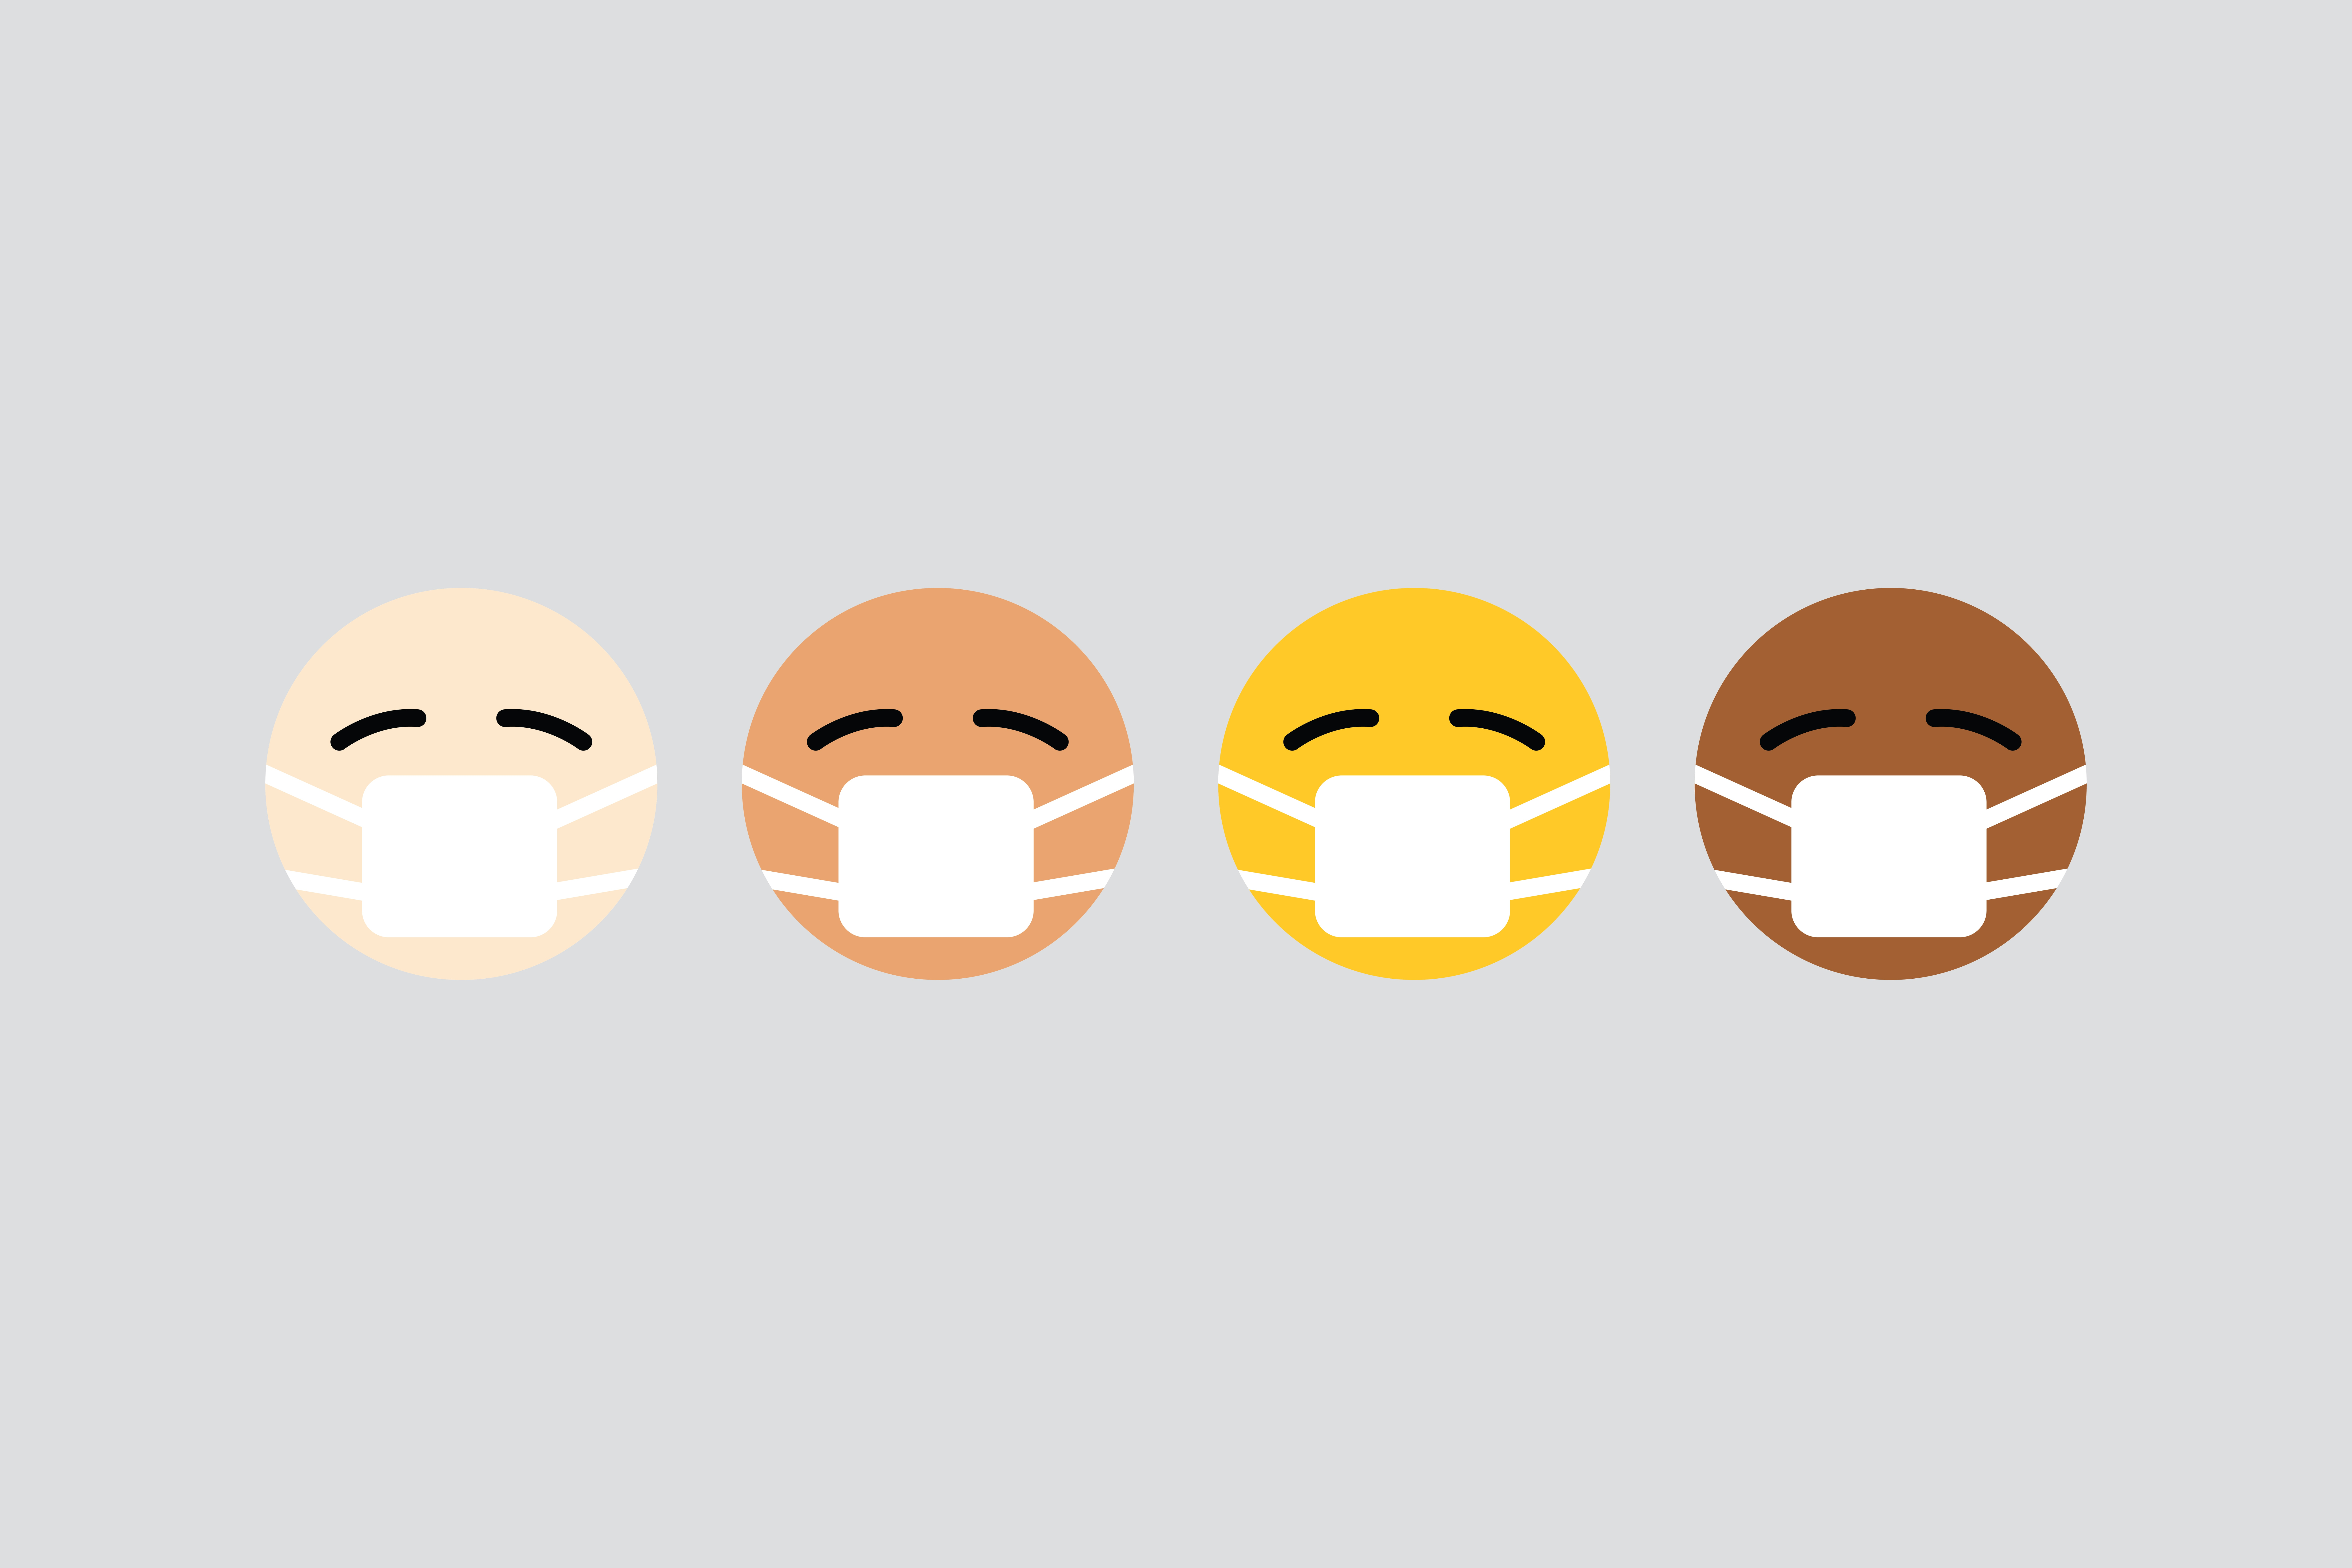 Masked emojis with different skin tones. Photo by visuals on Unsplash.